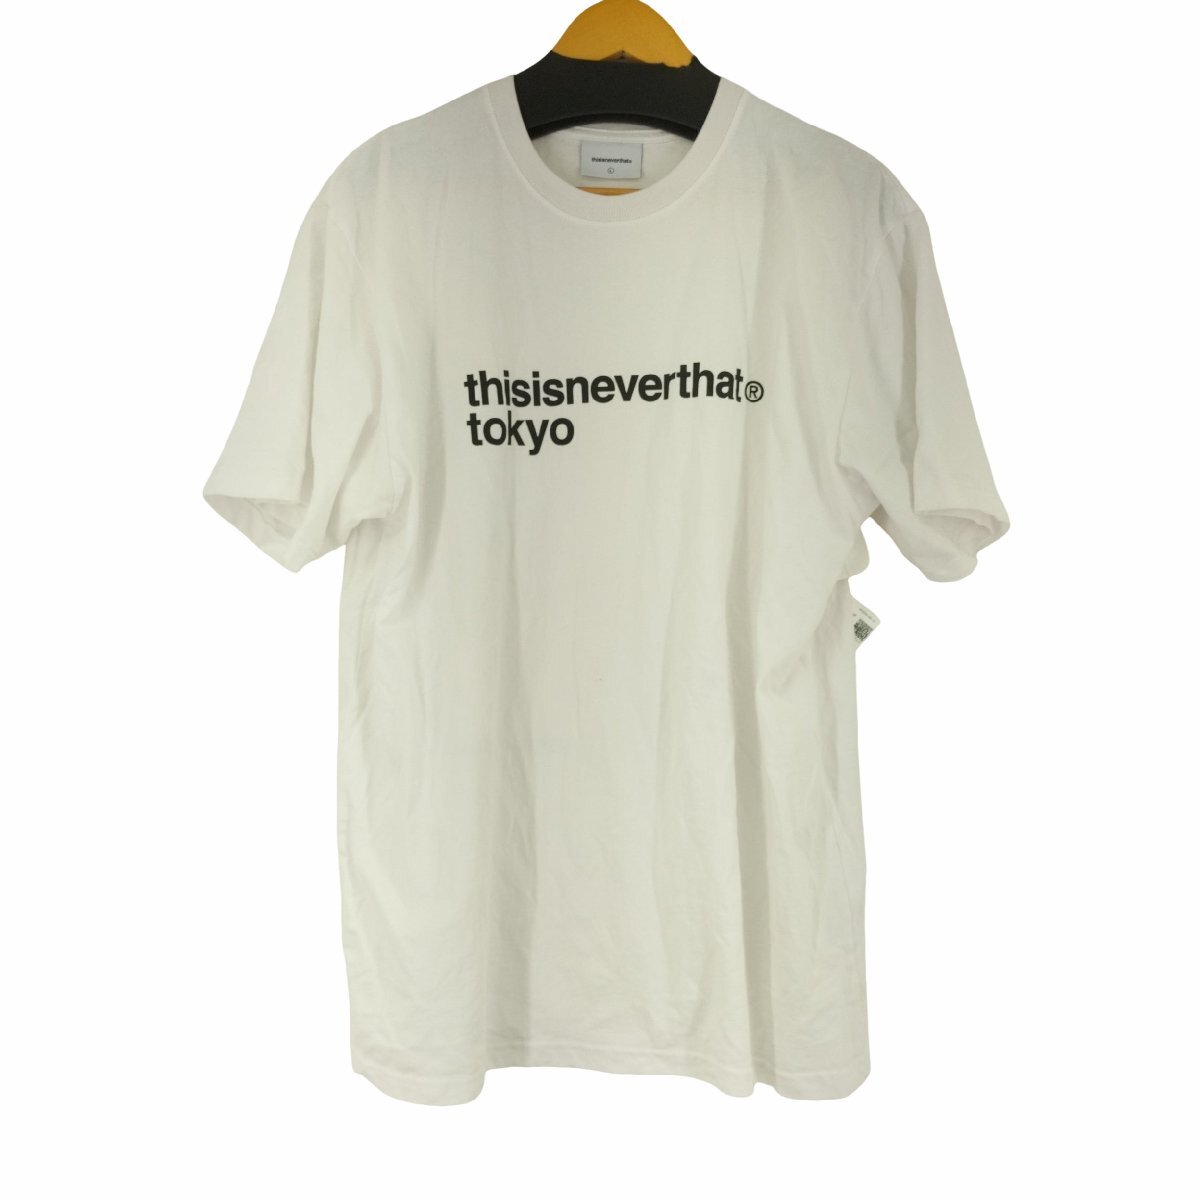 THIS IS NEVER THAT(ディスイズネバーザット) T-LOGO S/S TOP メンズ JP 中古 古着 0404_画像1